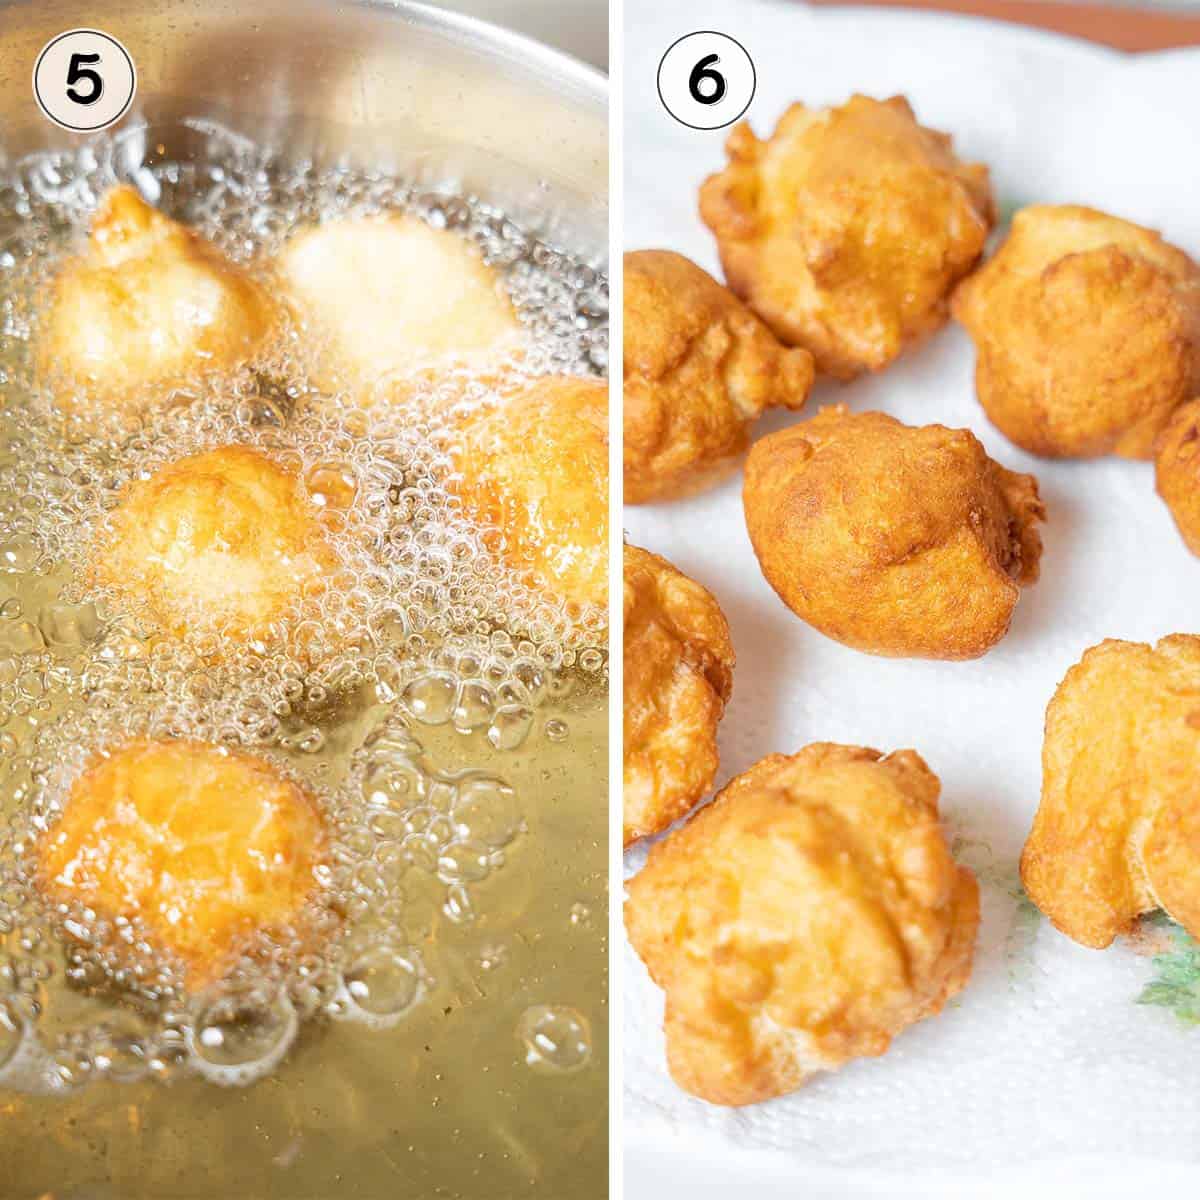 deep frying and draining the buñuelos.